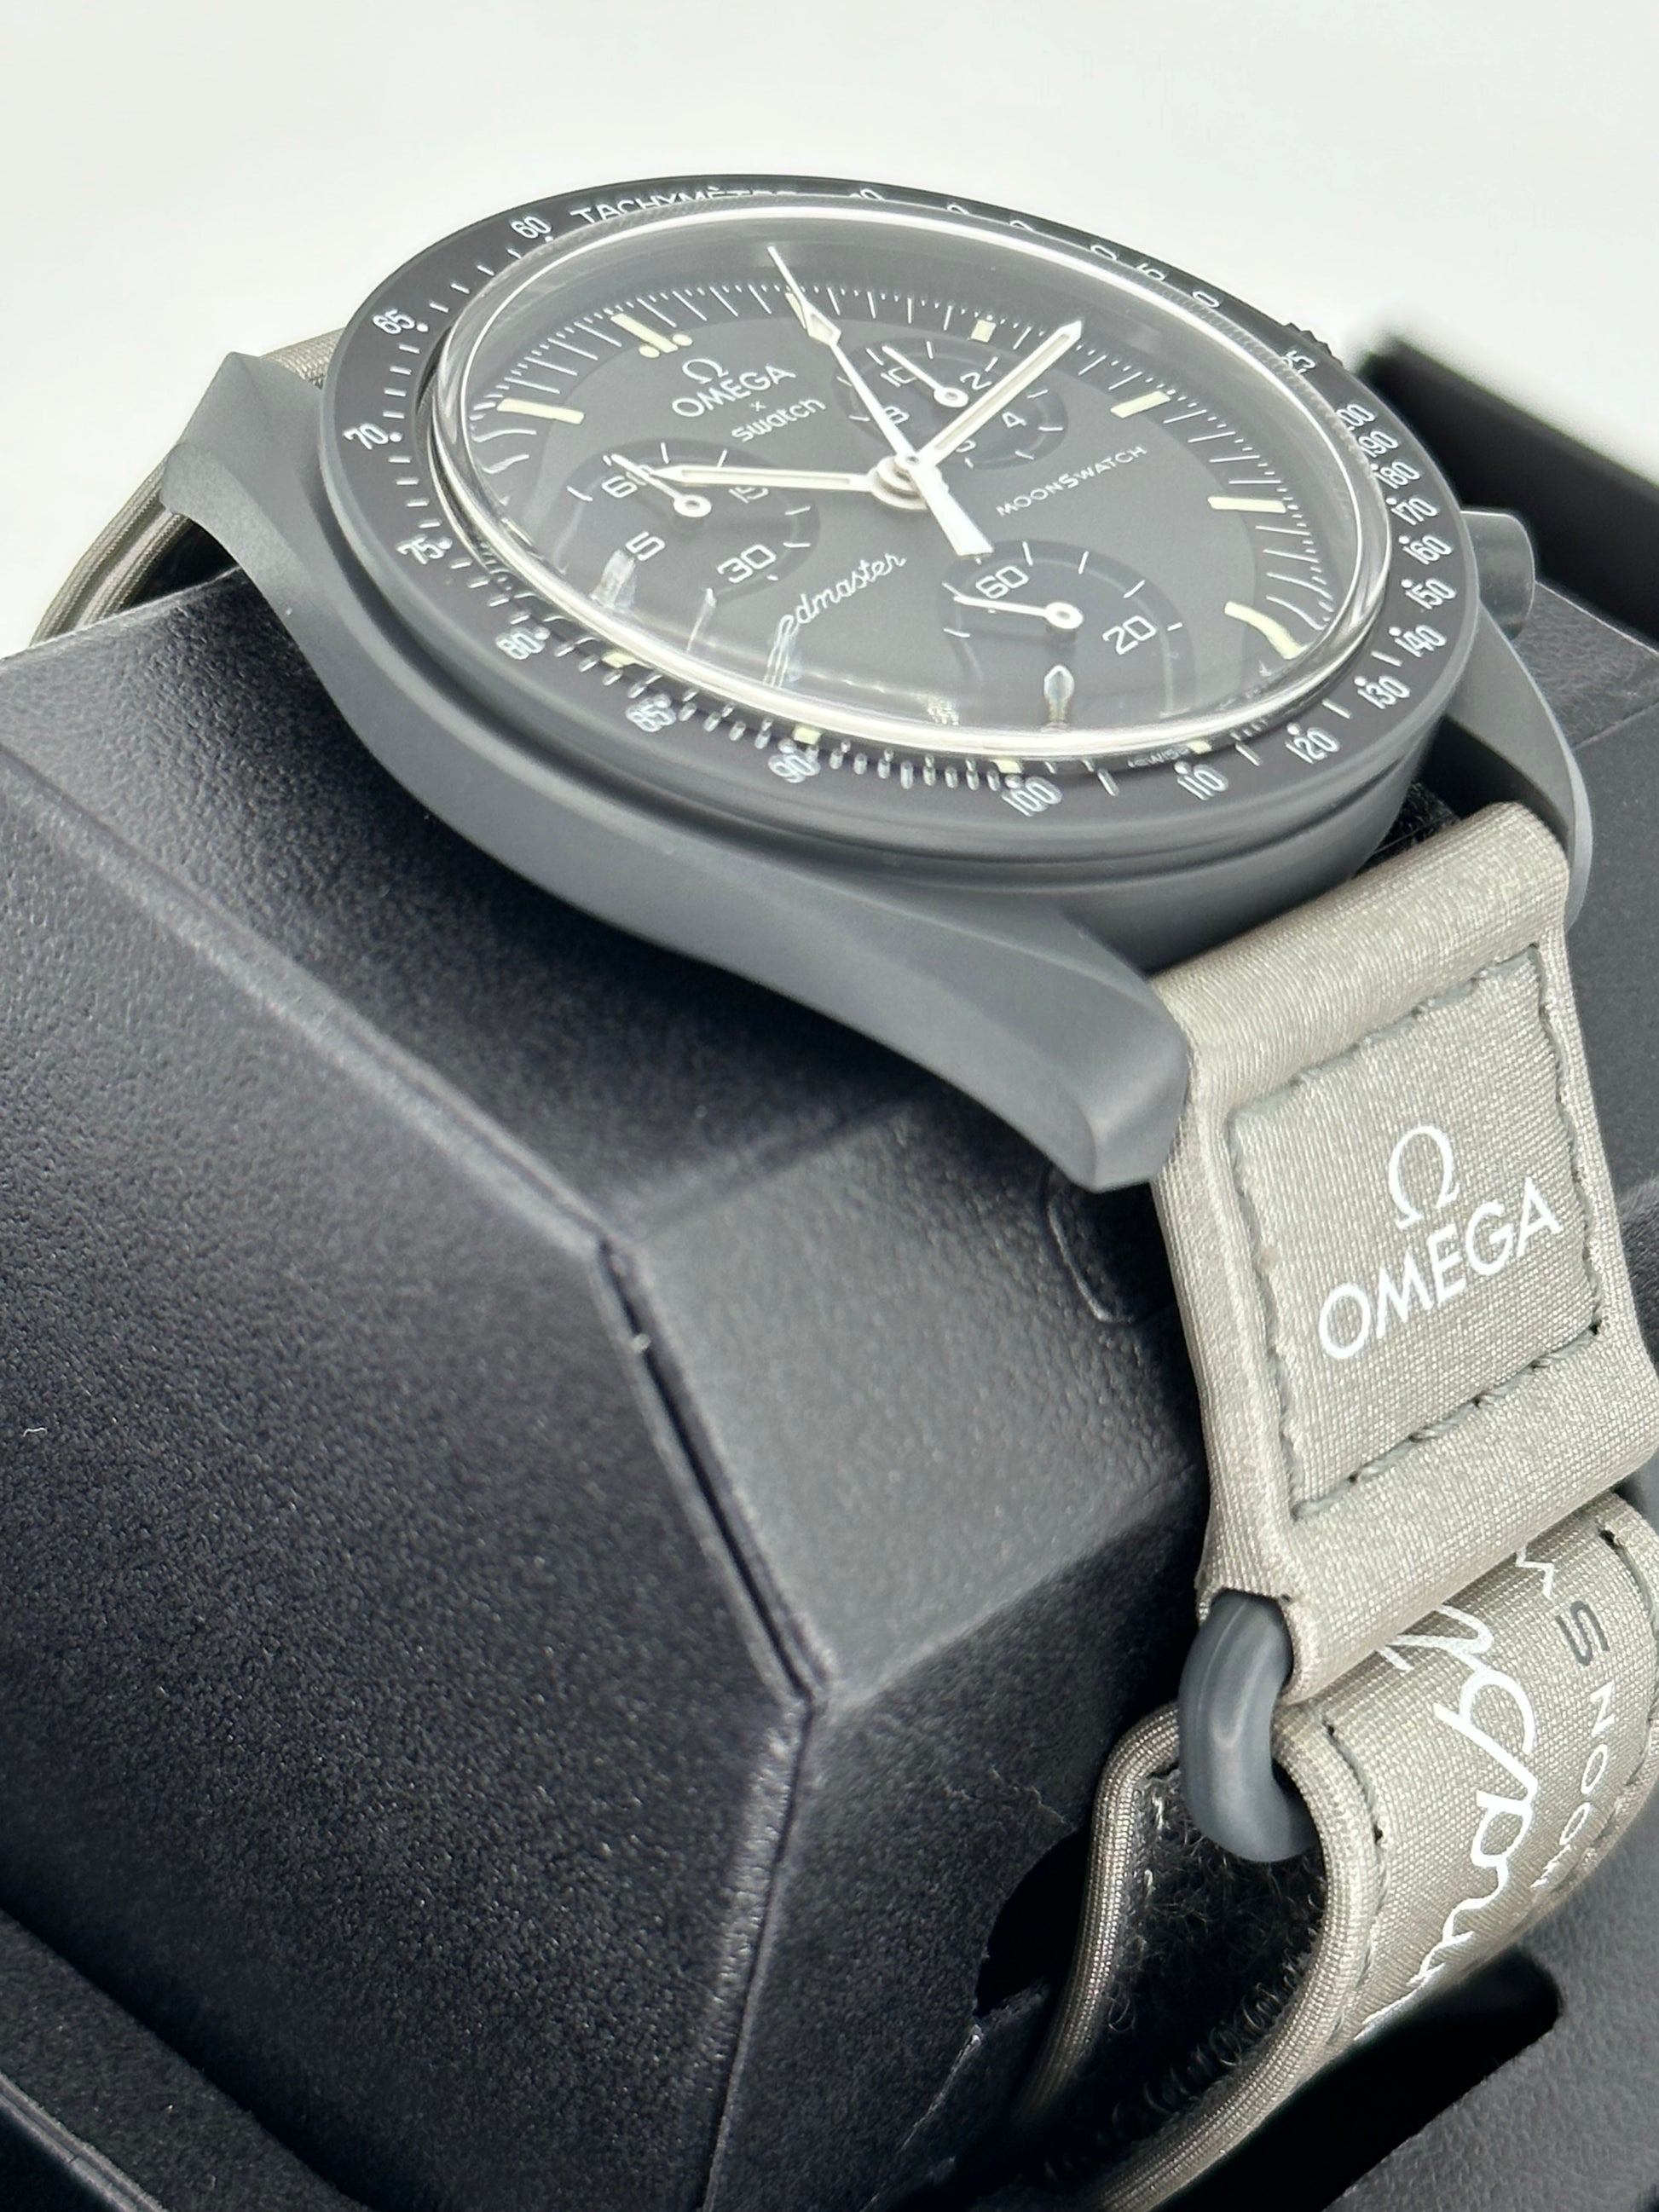 NEW Omega S033A100 Bioceramic Moon Swatch  - Mission to Mercury - MyWatchLLC